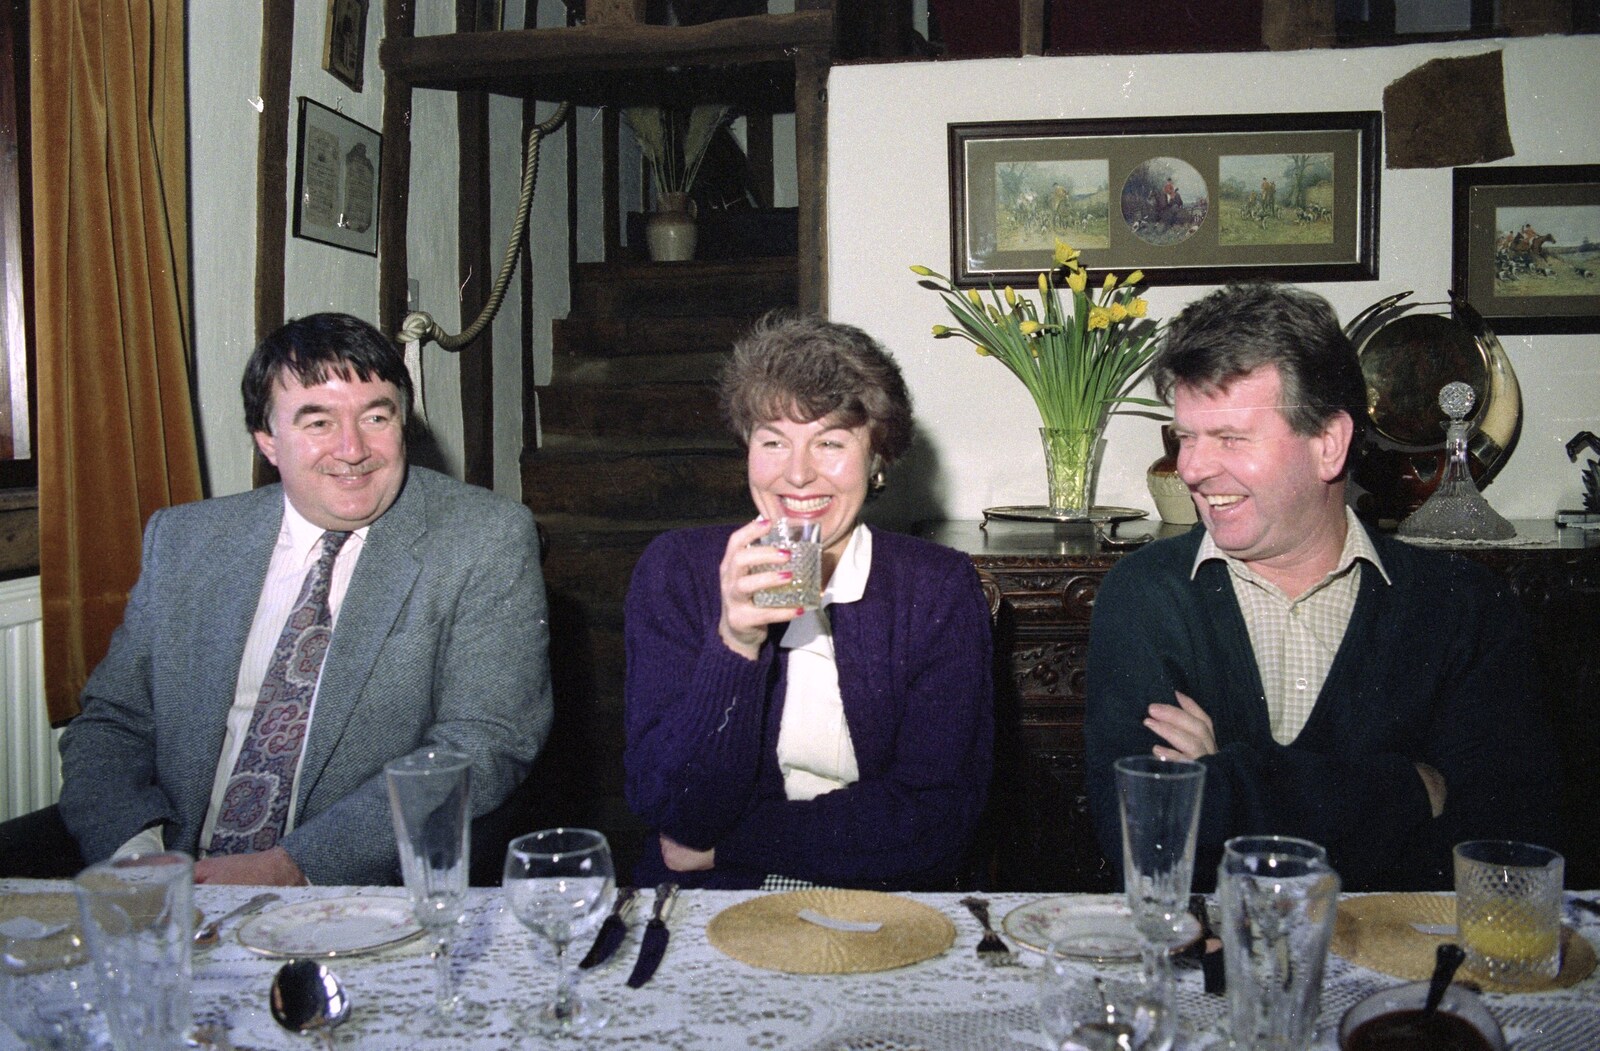 David, Sue and Mick from Dinner Round Geoff and Brenda's, and Hamish Visits, Stuston, Suffolk - 6th April 1992